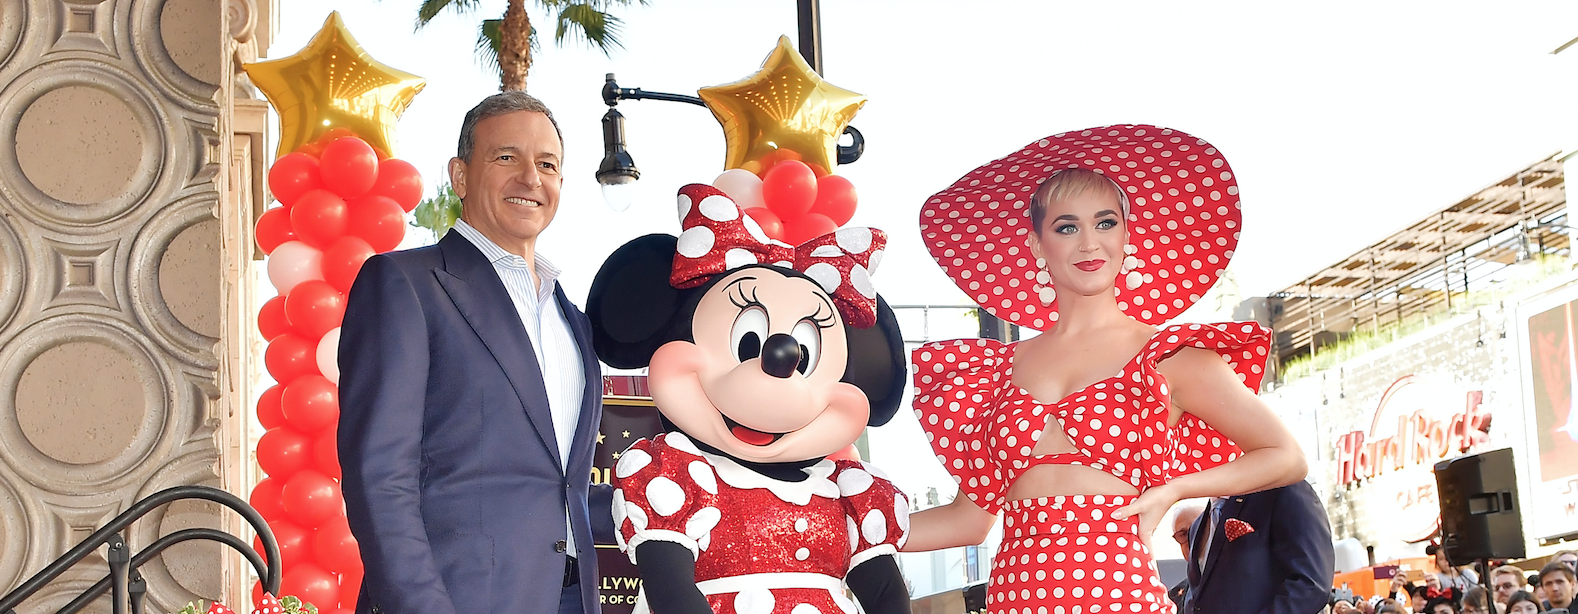 Minnie Mouse Receives Star On Hollywood Walk of Fame